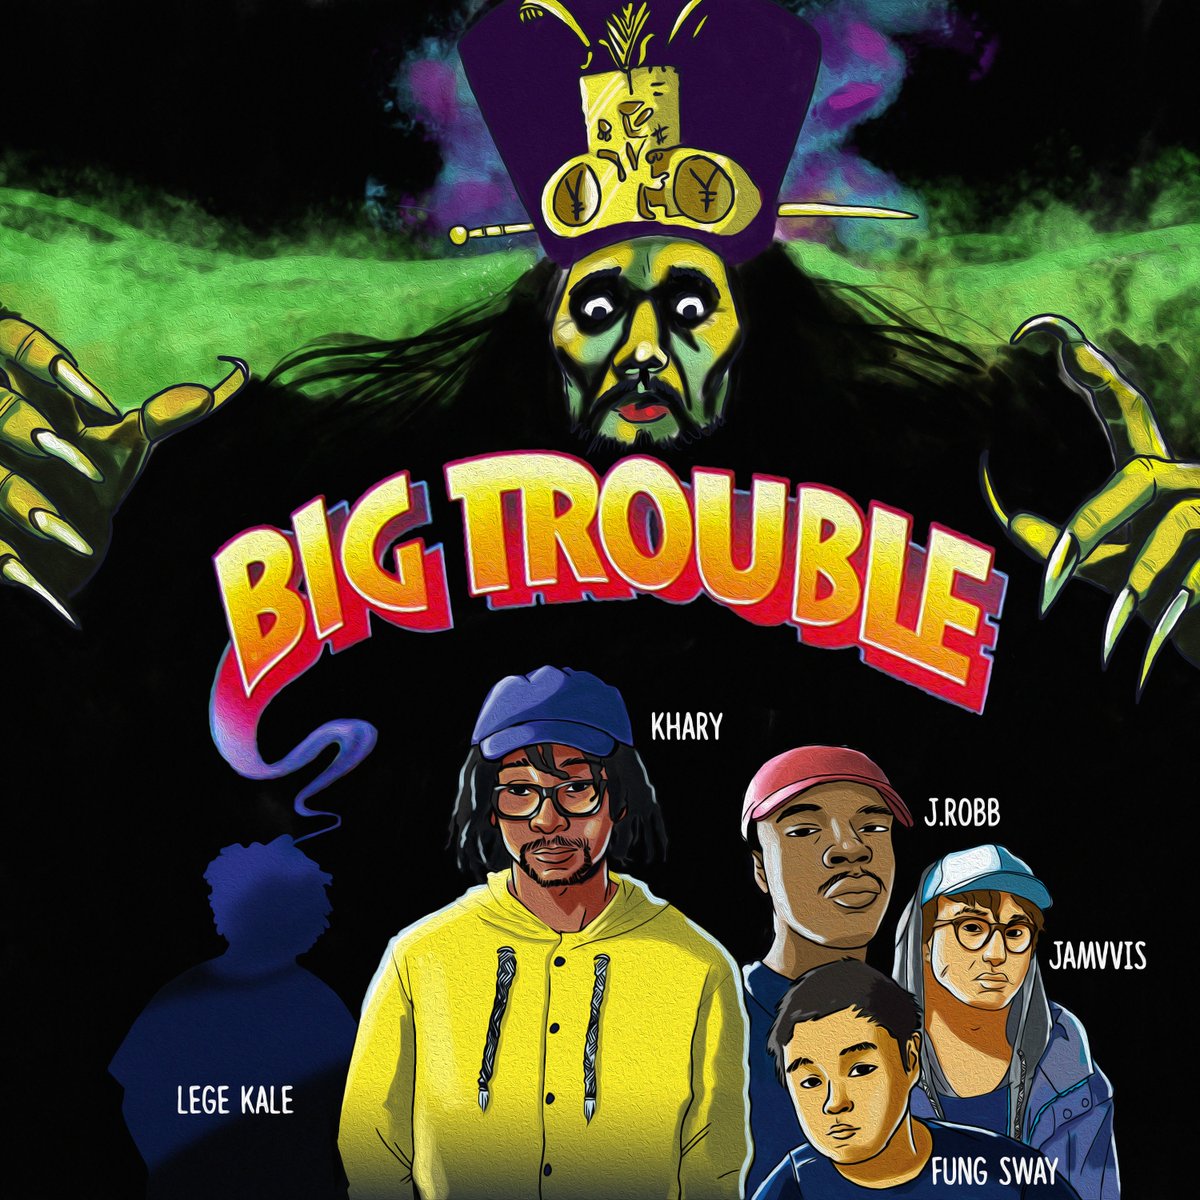 Listen To “Big Trouble” By Khary (Prod. By Jamvvis & Lege Kale)